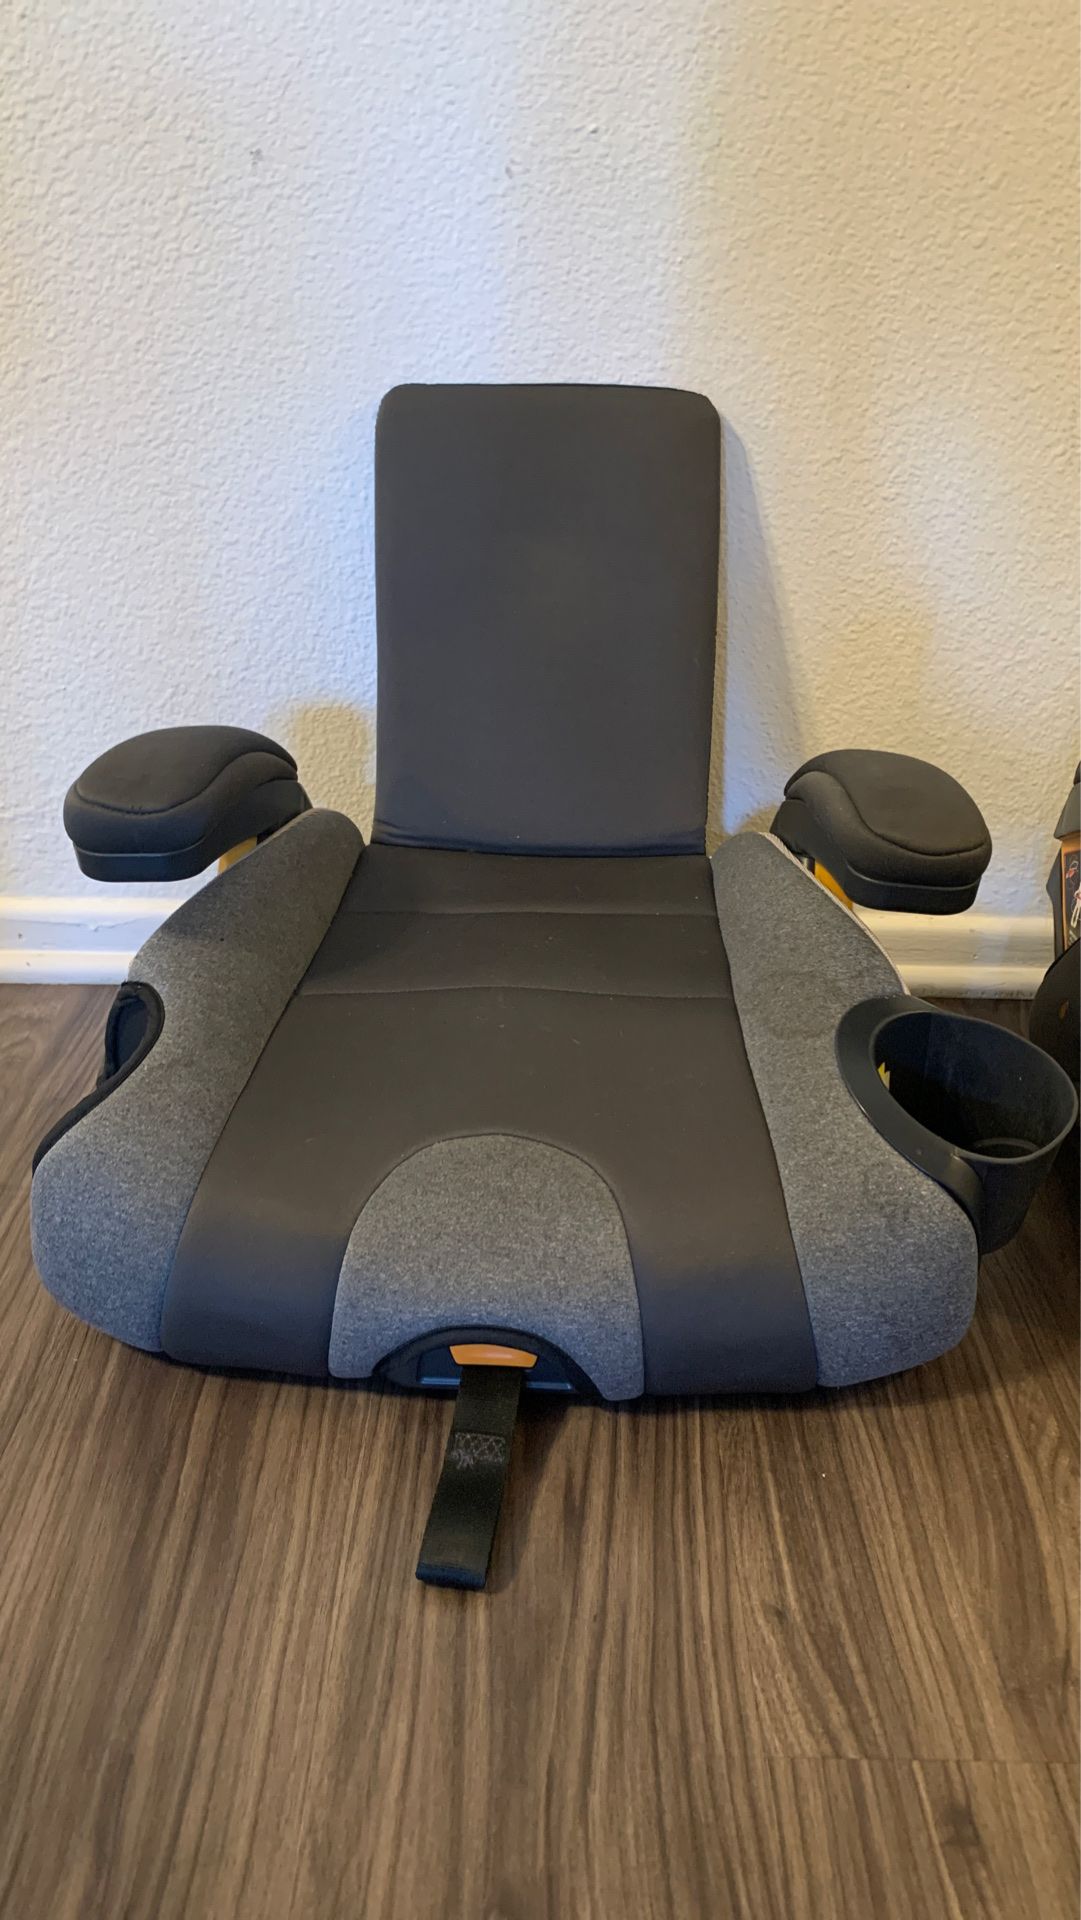 Chicco Booster seats